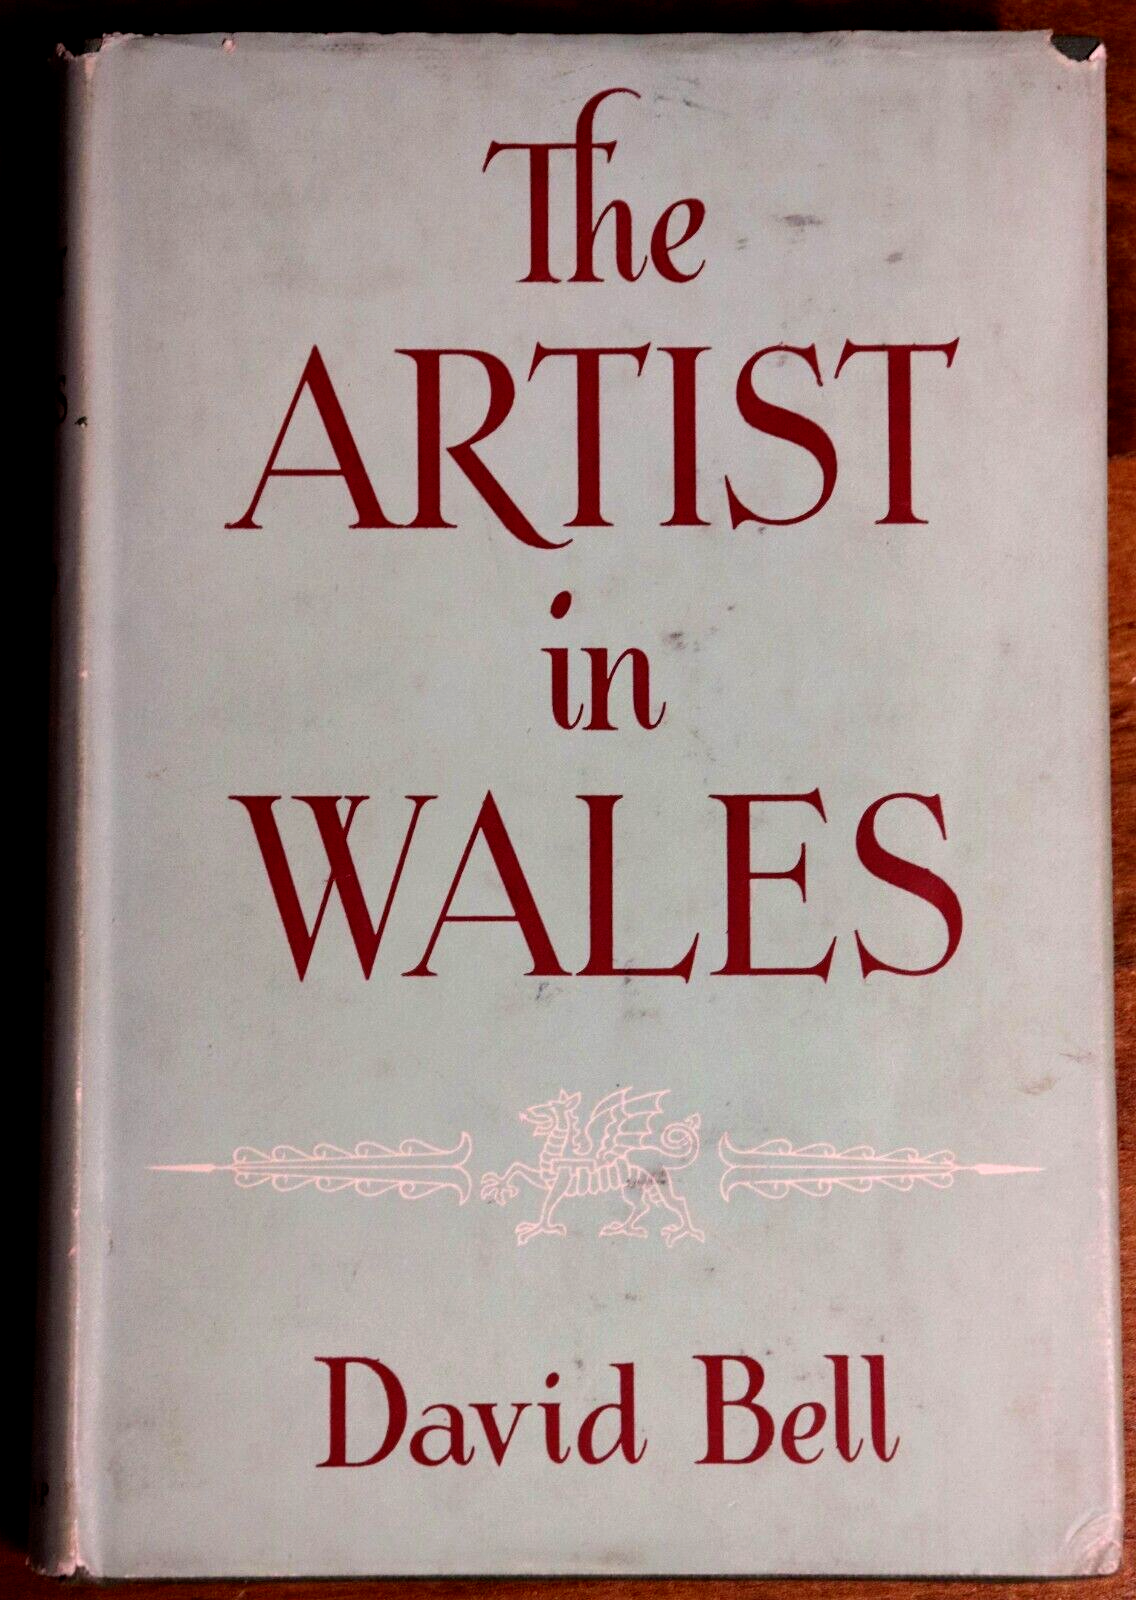 The Artist In Wales by David Bell - 1957 - 1st Edition Art History Book